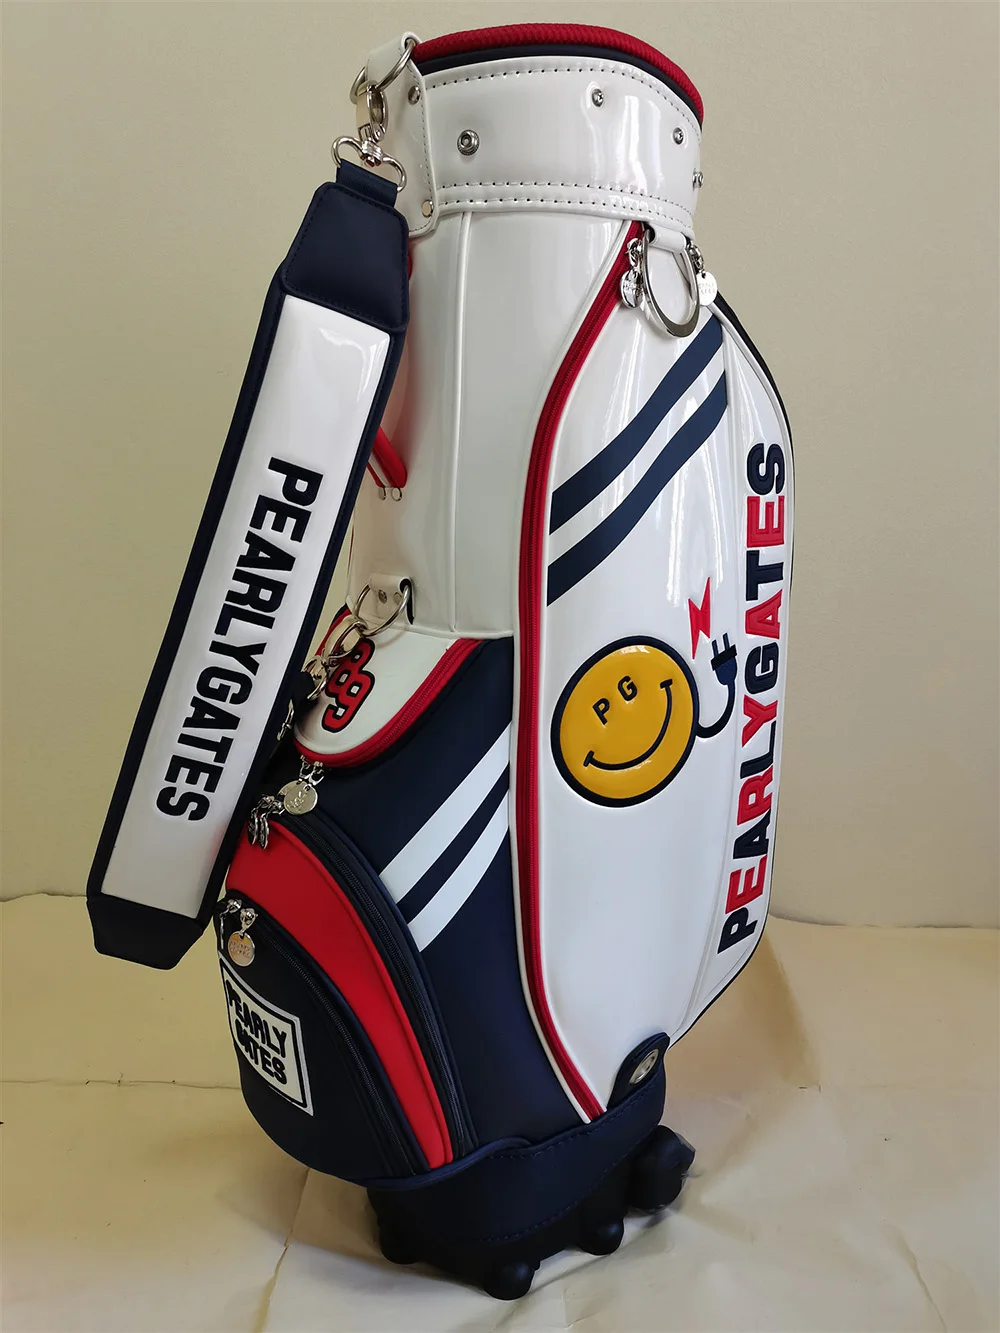 

2022 New Golf Bag Smile Pearly Gates 89 Golf Clubs Caddy Bag with Wheels Tie Rod Standard Aviation Bag Waterproof Package